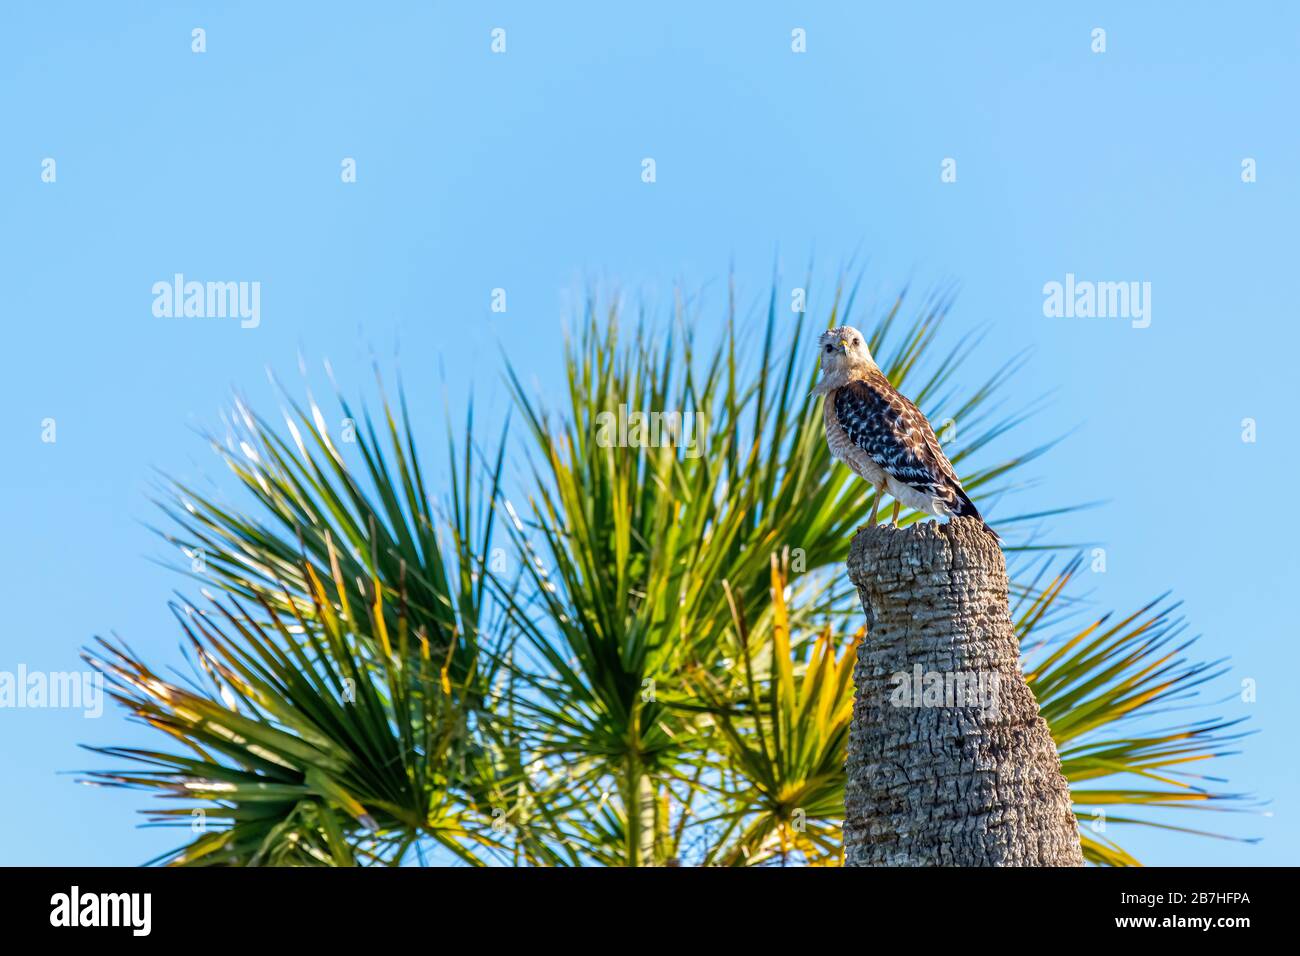 A Red-shouldered Hawk (Buteo lineatus) perched on a palm tree in the Orlando Wetlands in Orlando, Florida, USA. Stock Photo